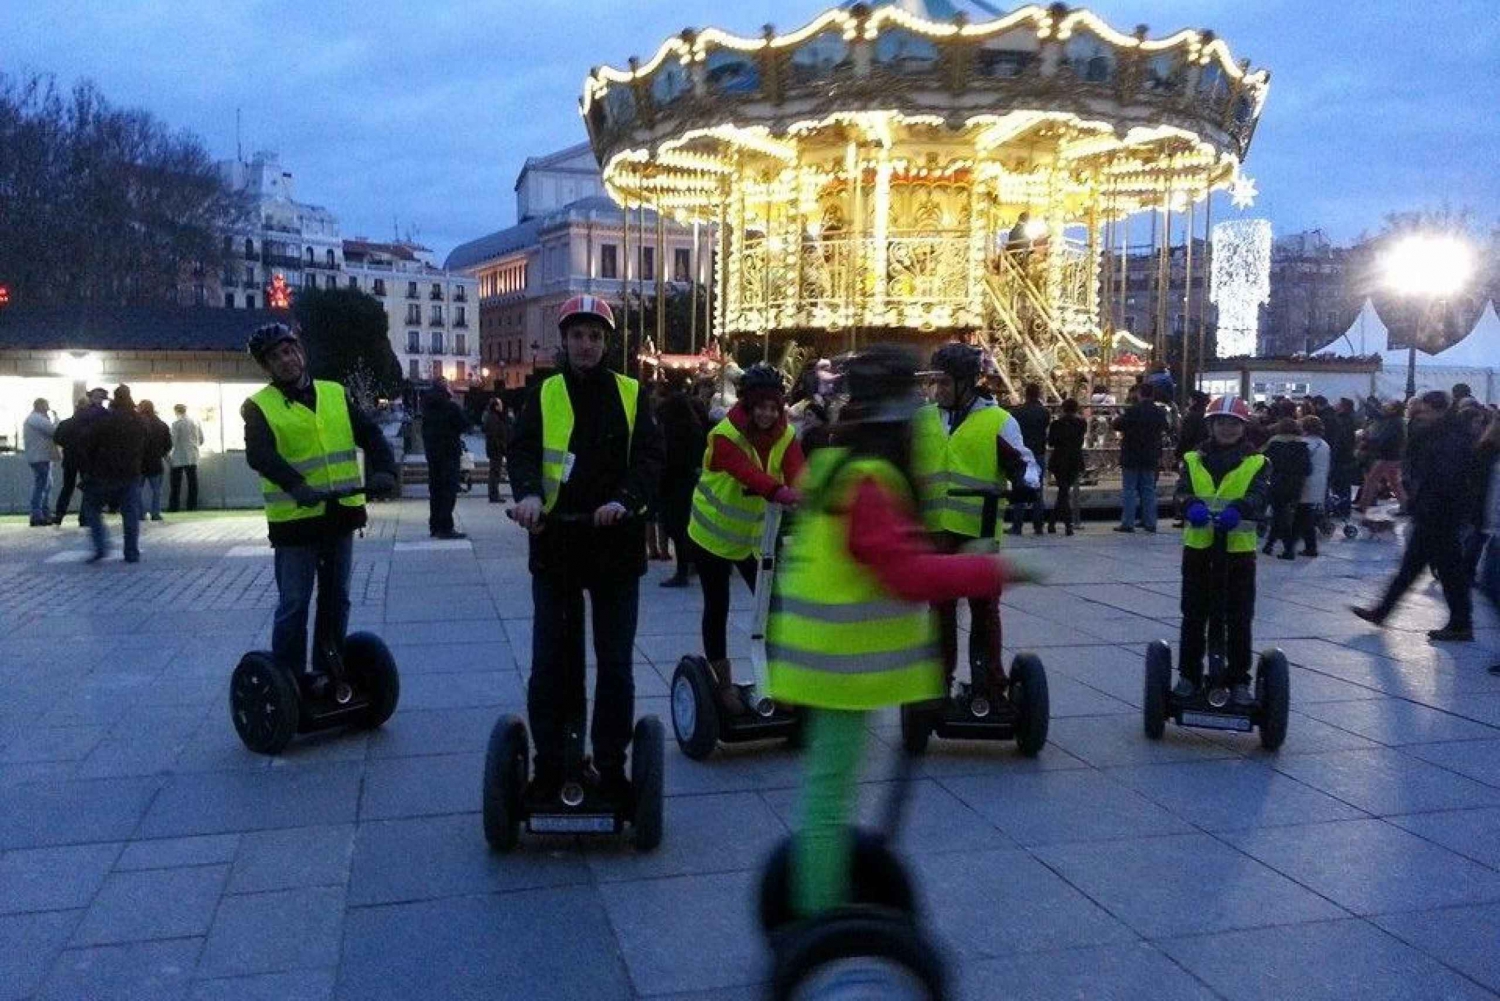 Madrid by Night: 1-timers Segway-tur